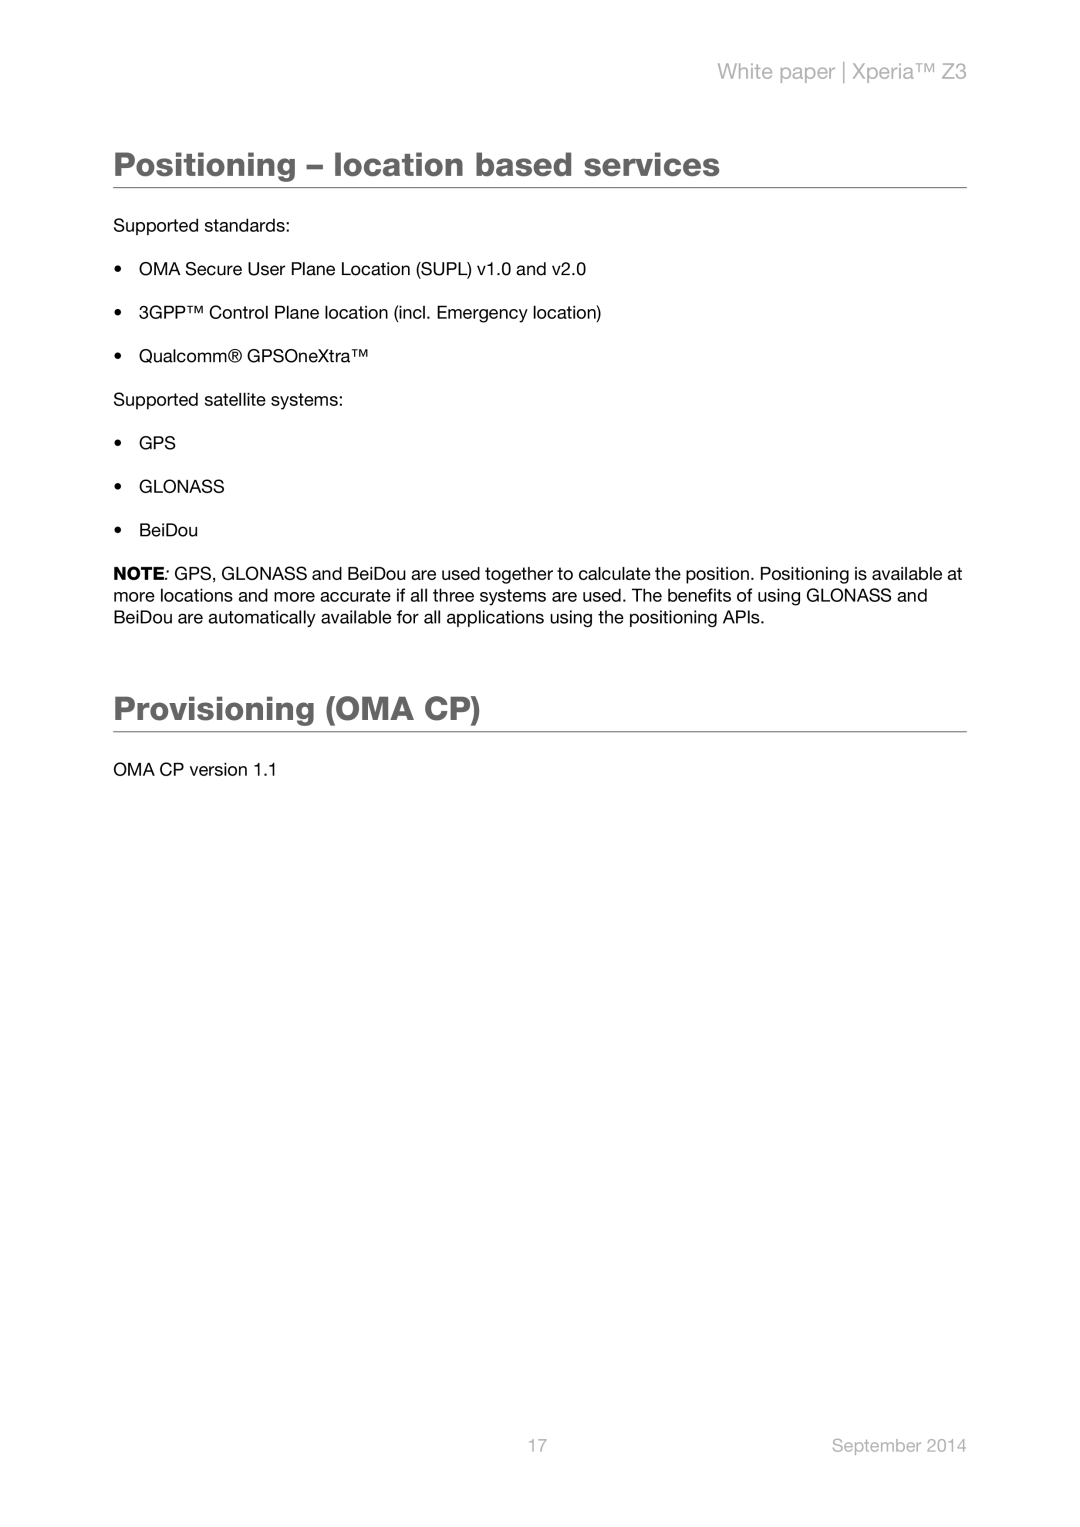 Sony D6643, D6653, D6633, D6616 Positioning - location based services, Provisioning OMA CP, White paper Xperia Z3, September 